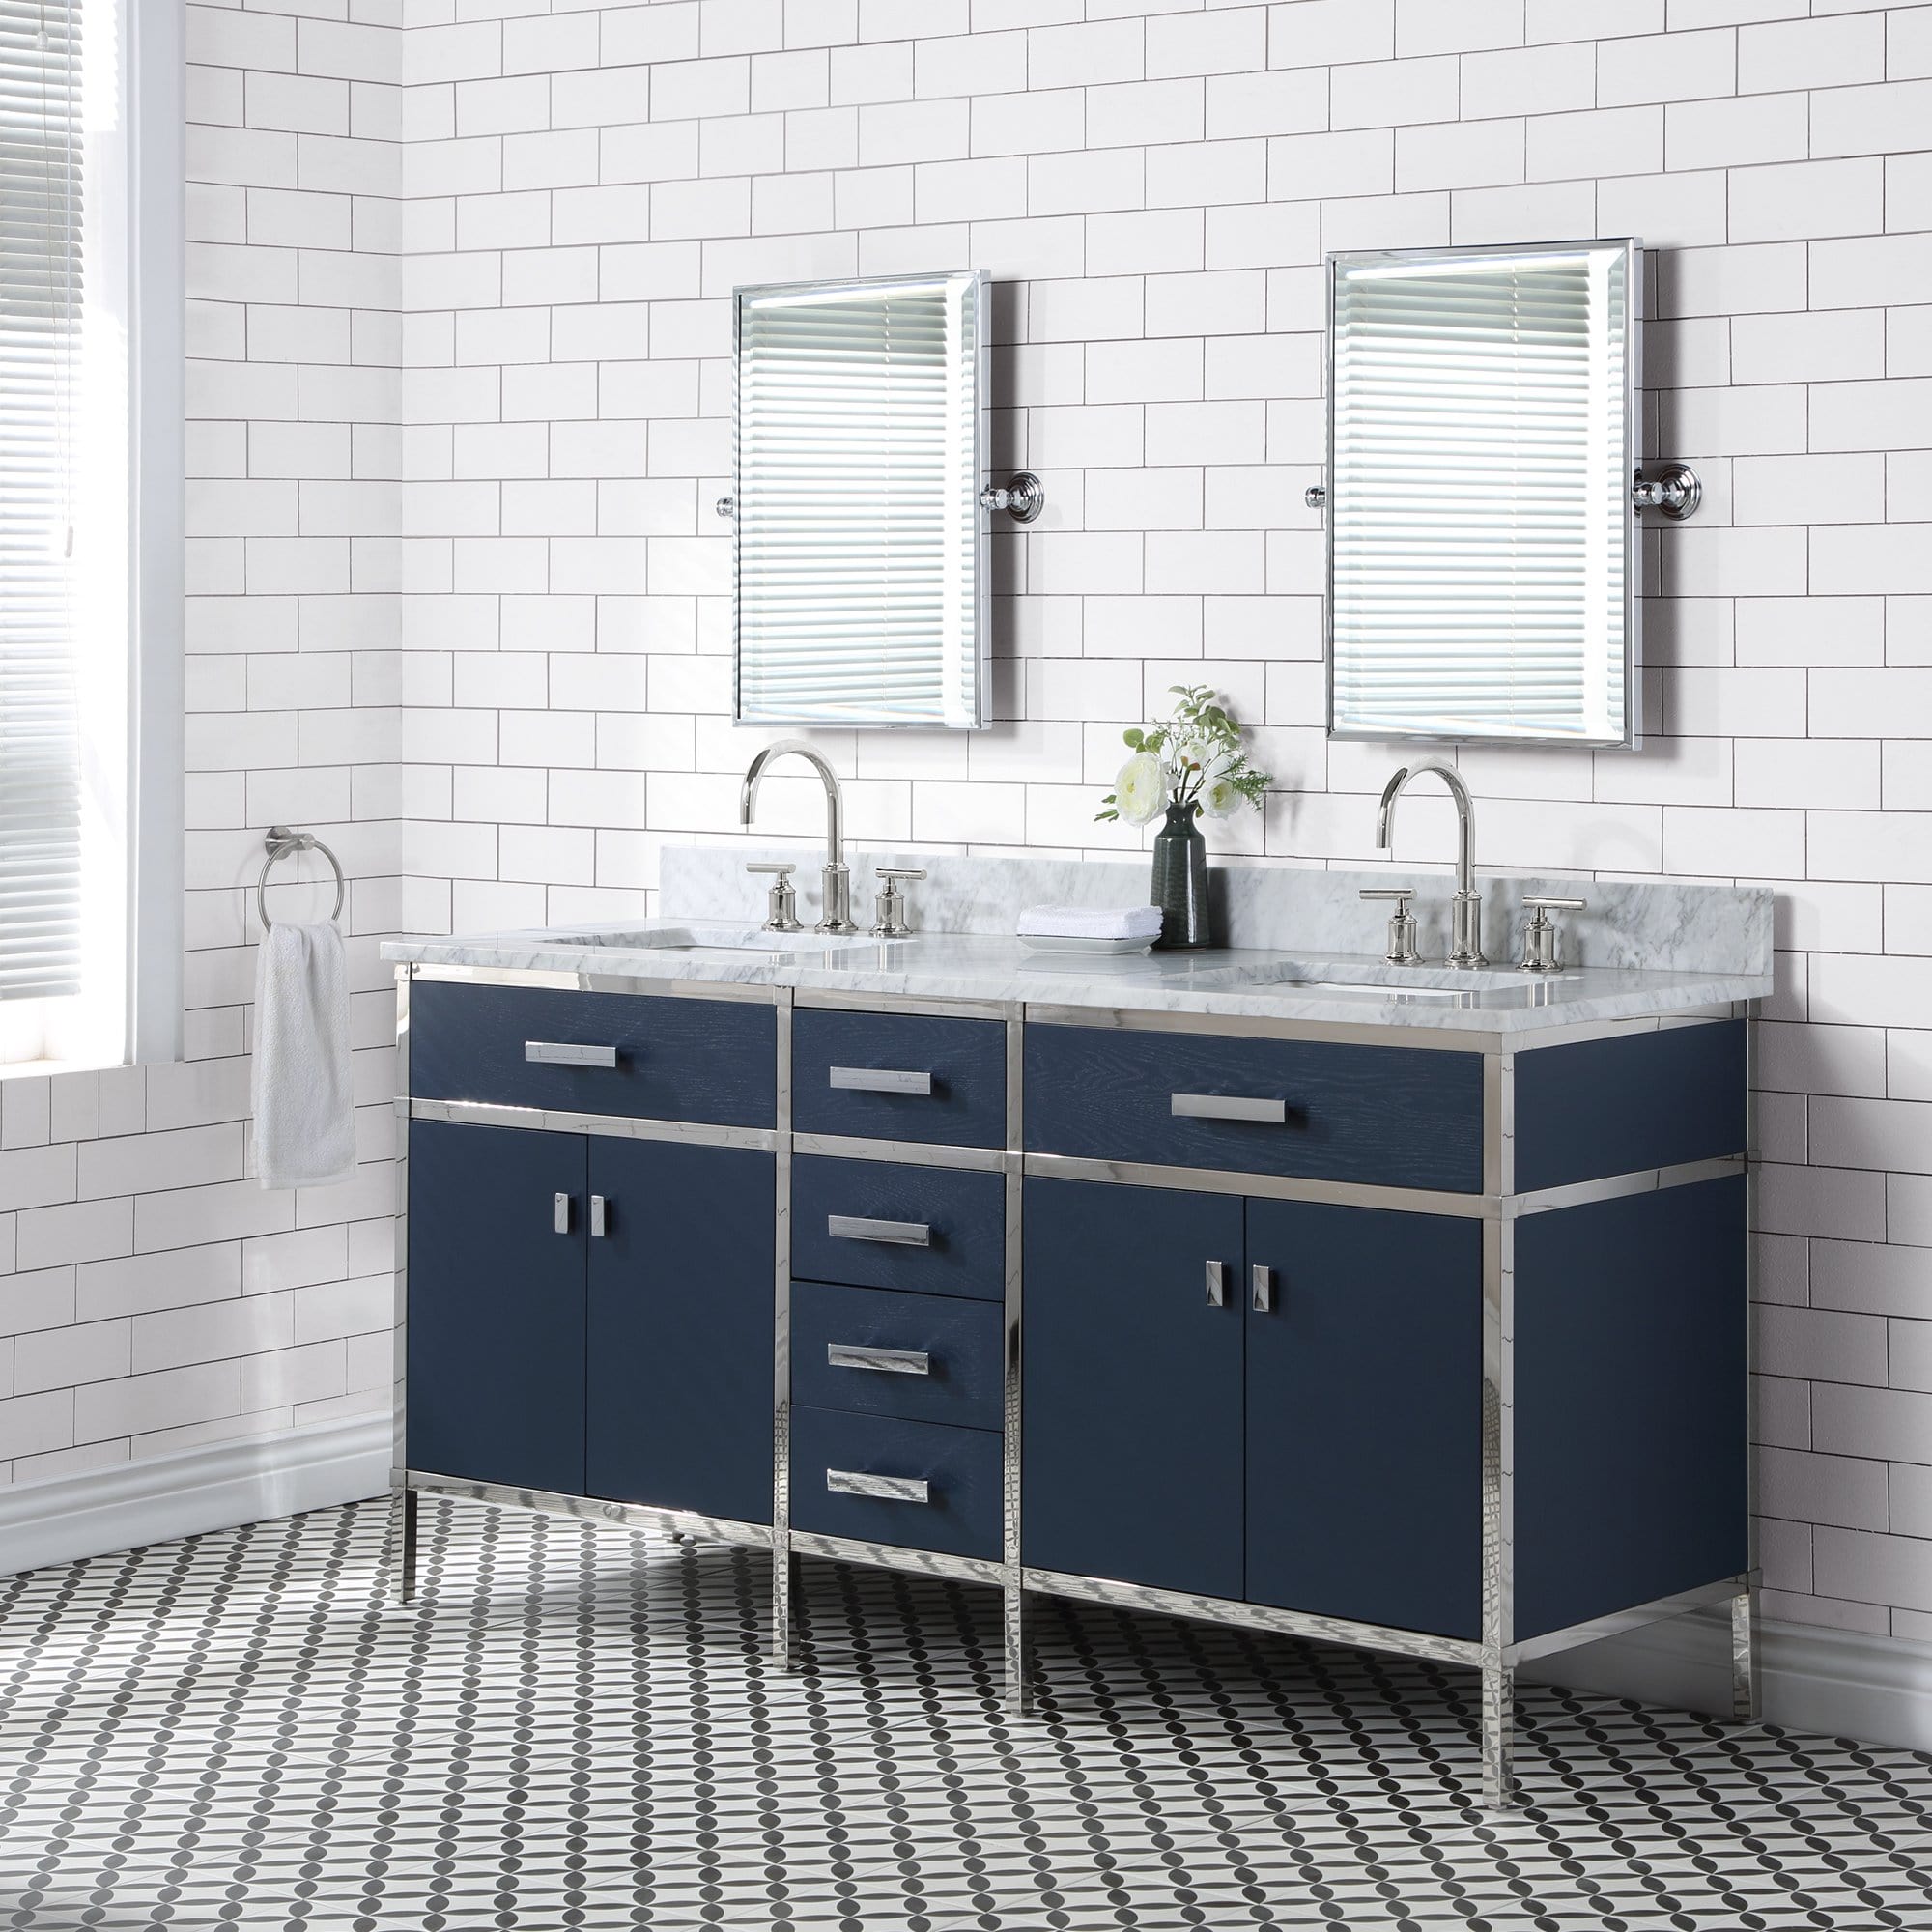 Water Creation Marquis 72 In. Double Sink Carrara White Marble Countertop Vanity in Monarch Blue with Hook Faucets - Molaix732030765986Bathroom vanityMQ72CW01MB-000BL1401